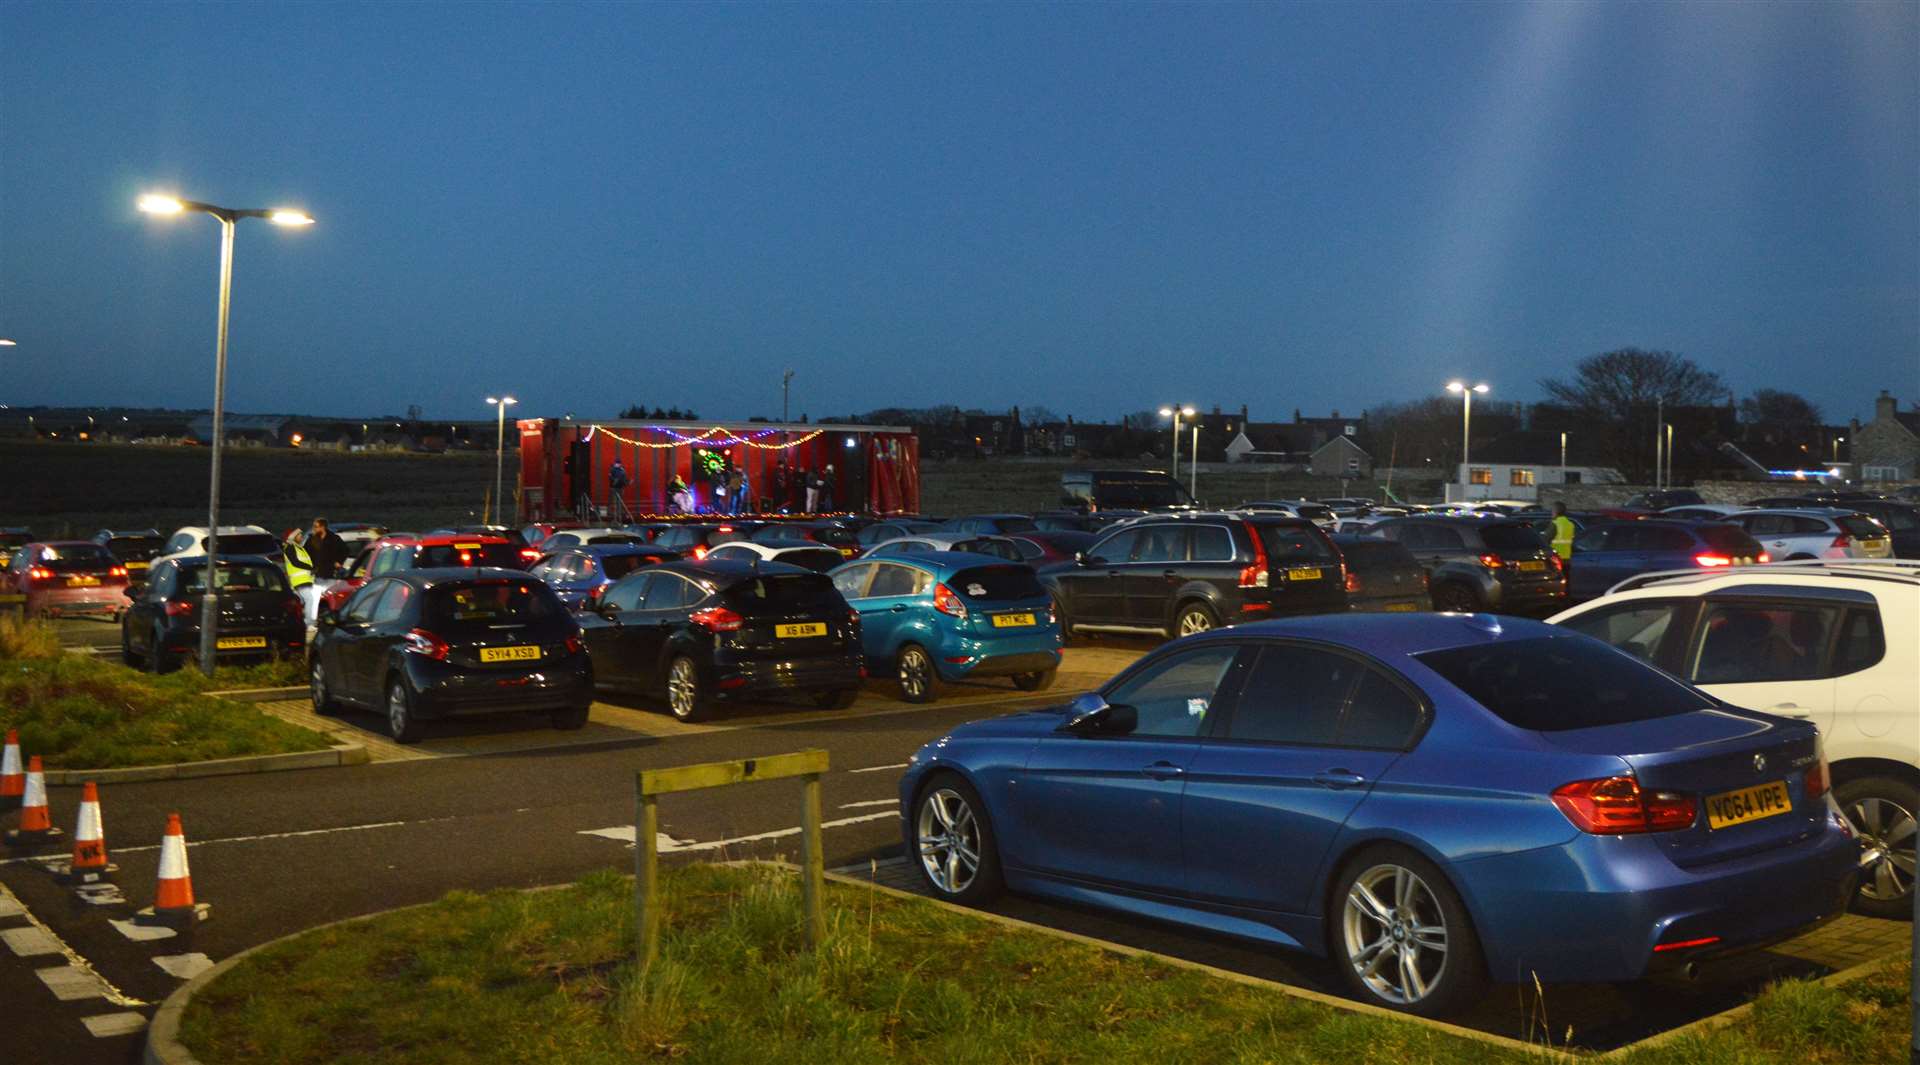 Some of the vehicles in the East Caithness Community Facility car park during Sunday's drive-in carol event. Picture: Susan Barrie